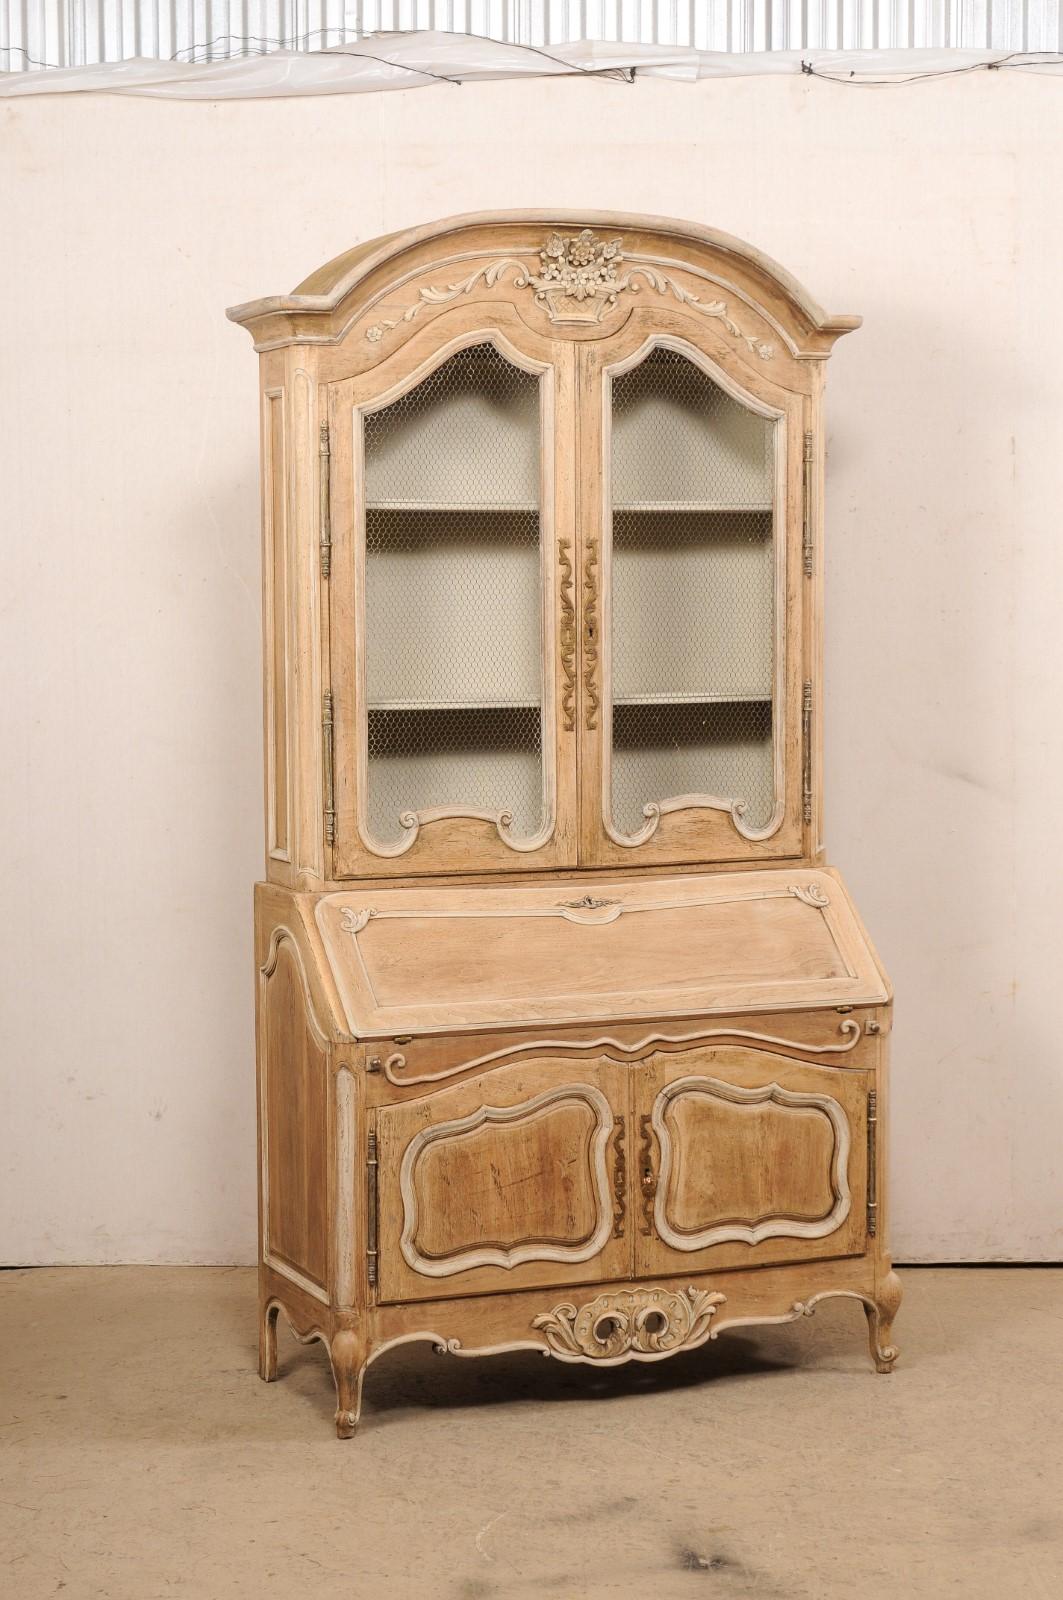 A tall French Louis XV style carved and bleached wood display and storage cabinet with secretary. This vintage cabinet from France is topped with a thickly carved arched bonnet pediment, which perfectly frames the corbeilles de fleurs (basket with